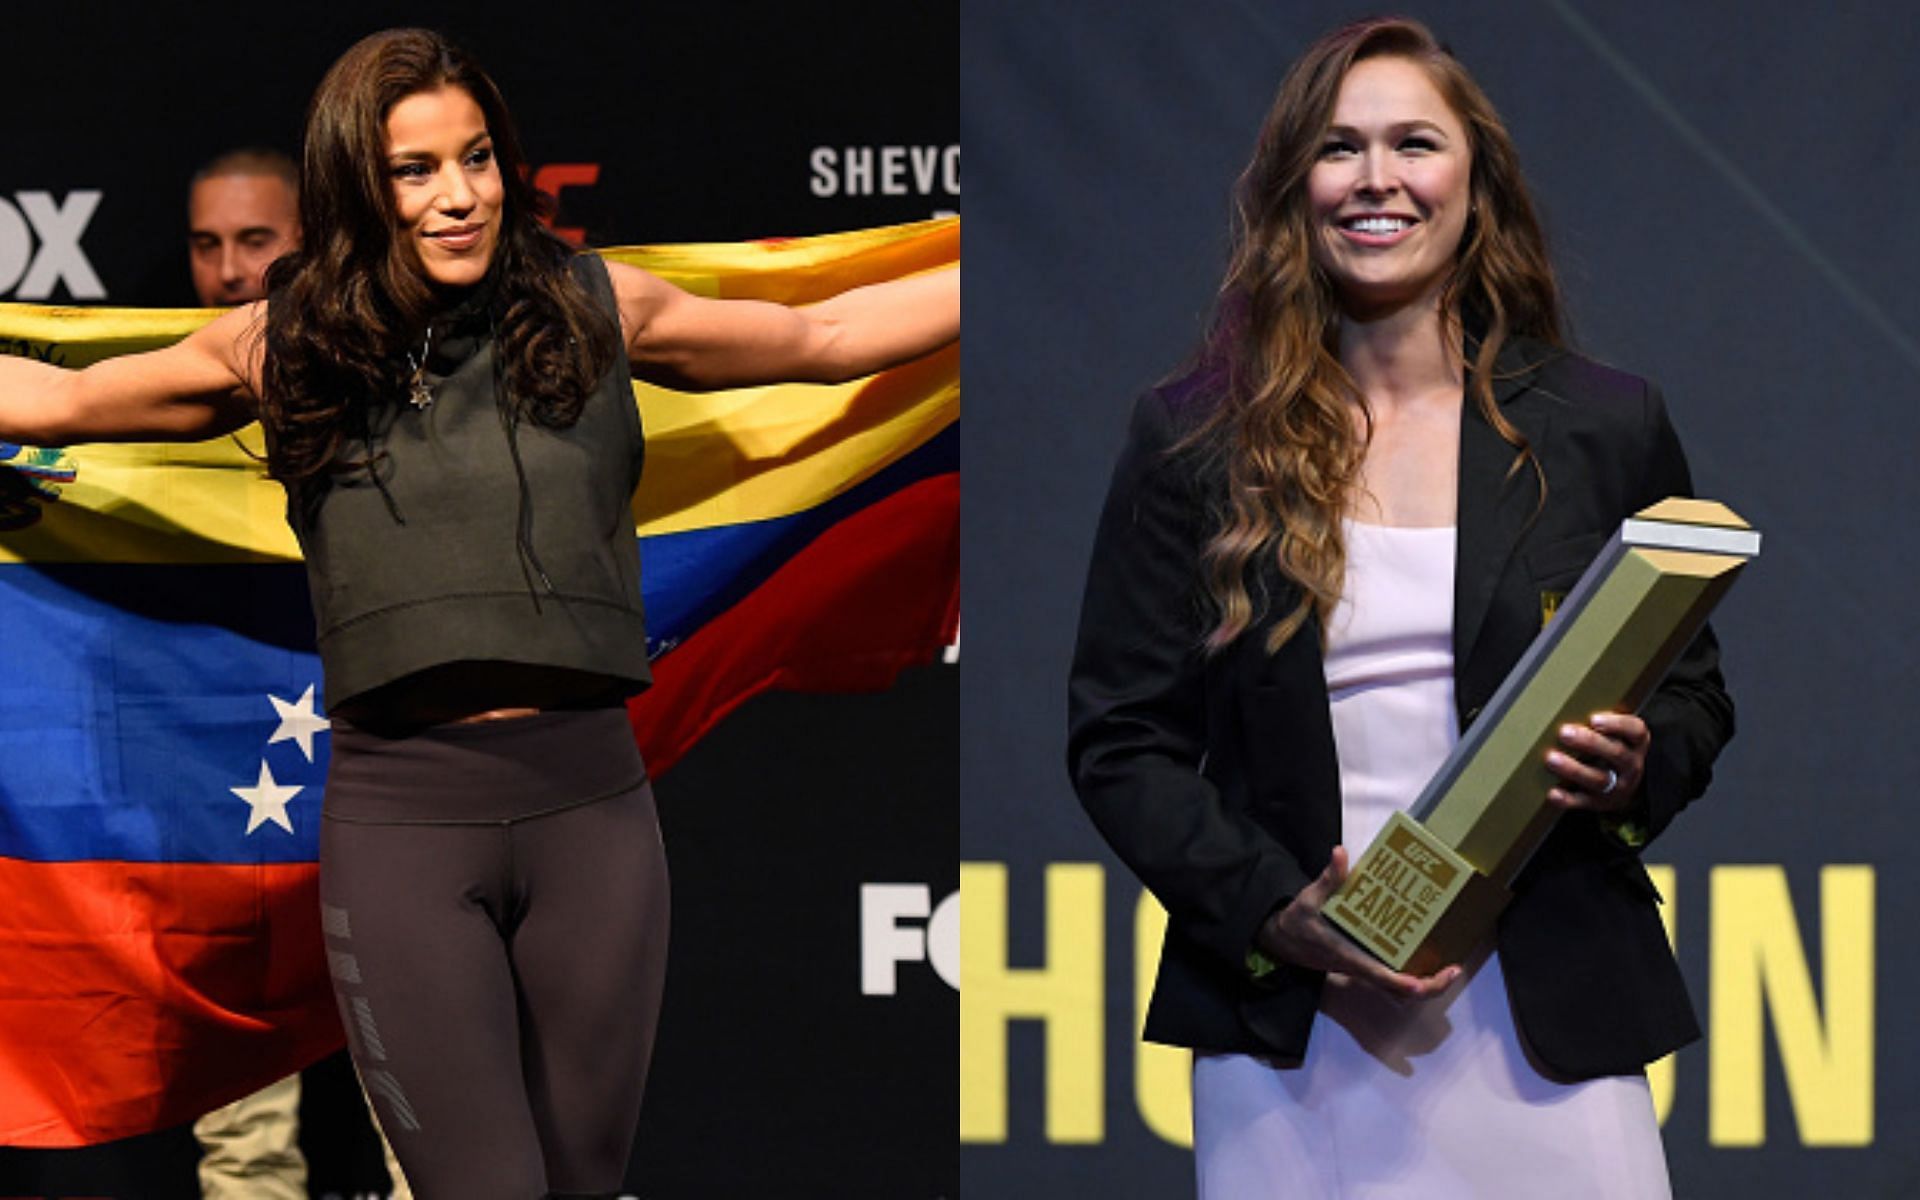 Julianna Pena (left) and Ronda Rousey (right)